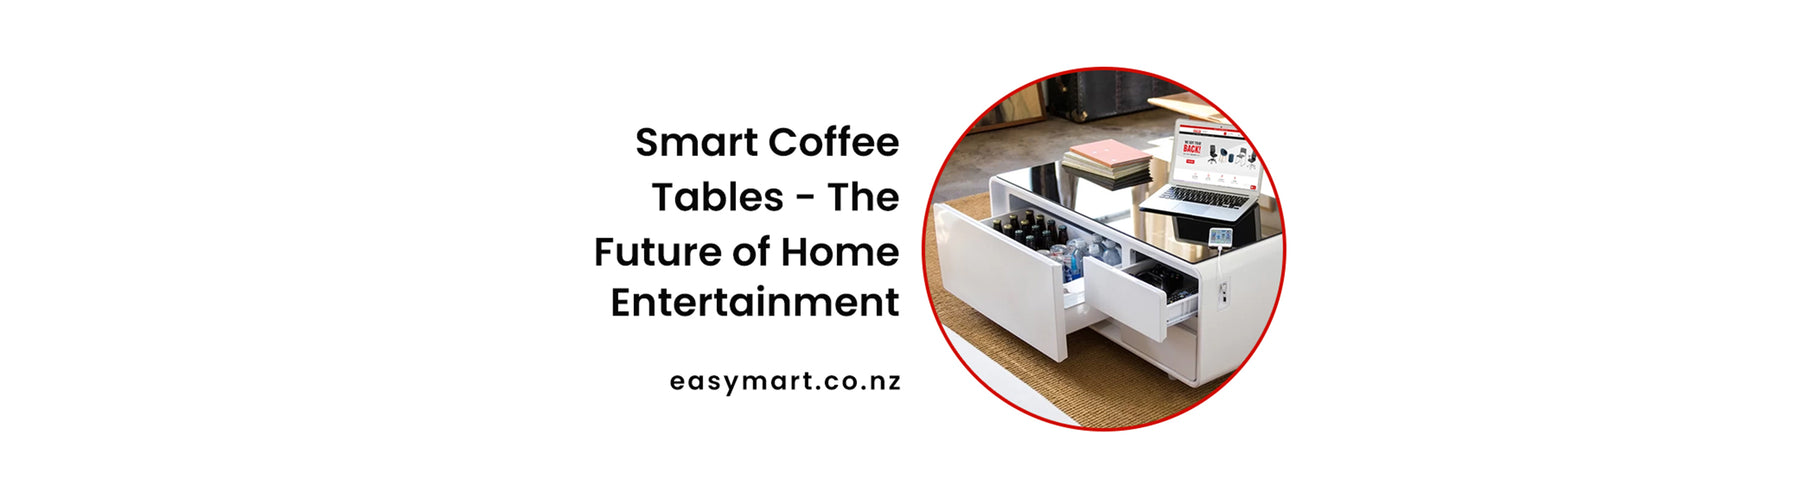 Smart Coffee Tables - The Future of Home Entertainment